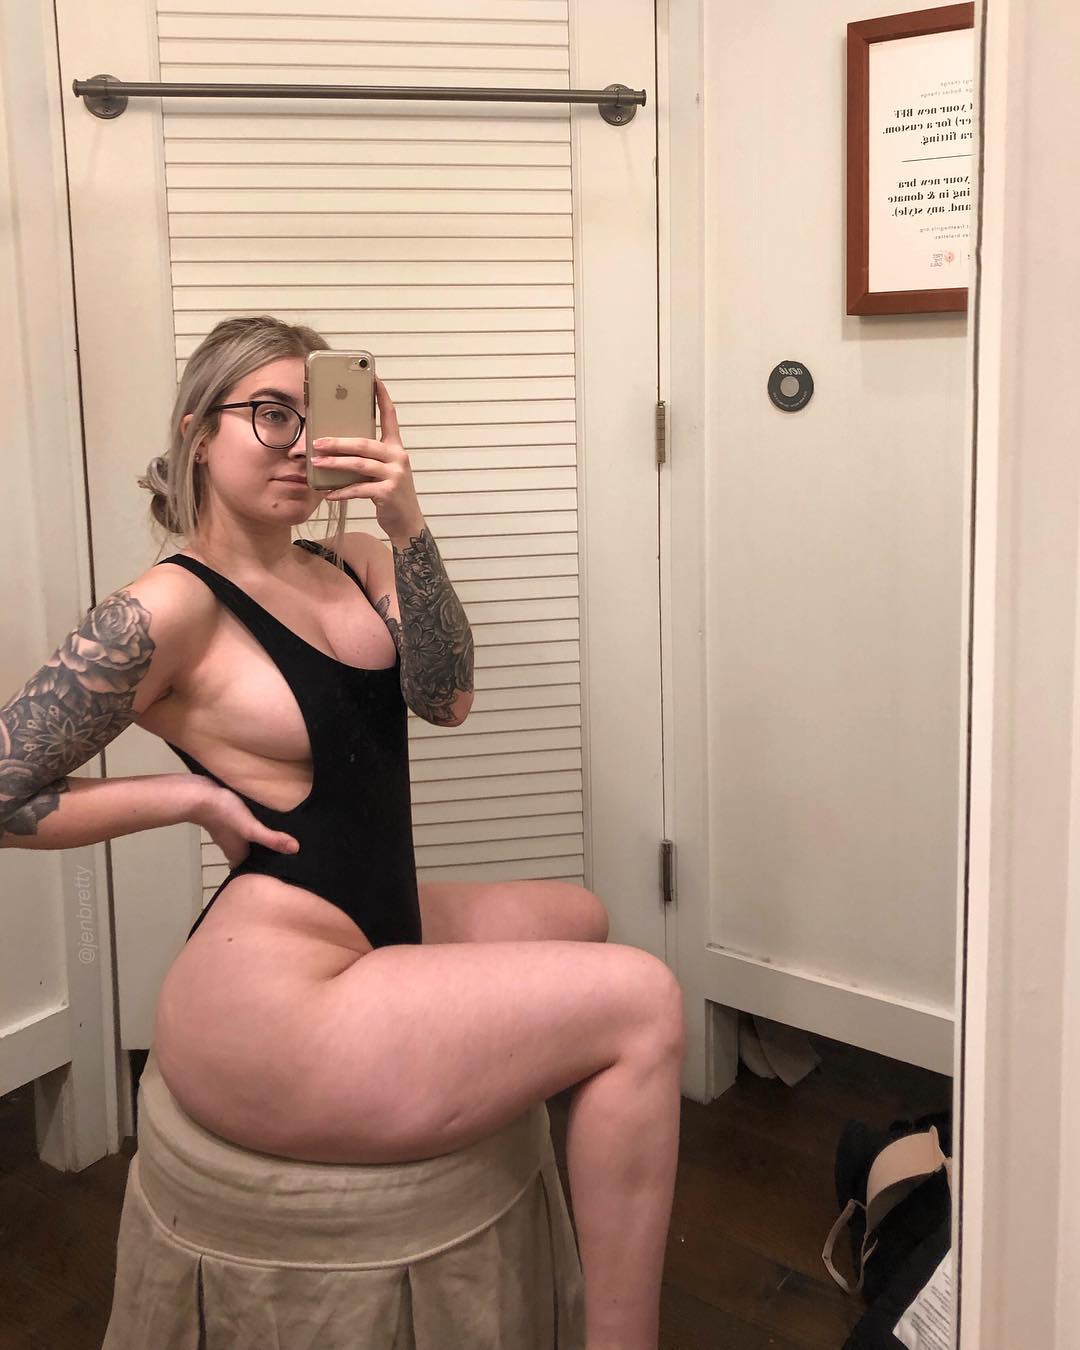 Jen Brett sex tape and nudes photos leaks online from her onlyfans, patreon...